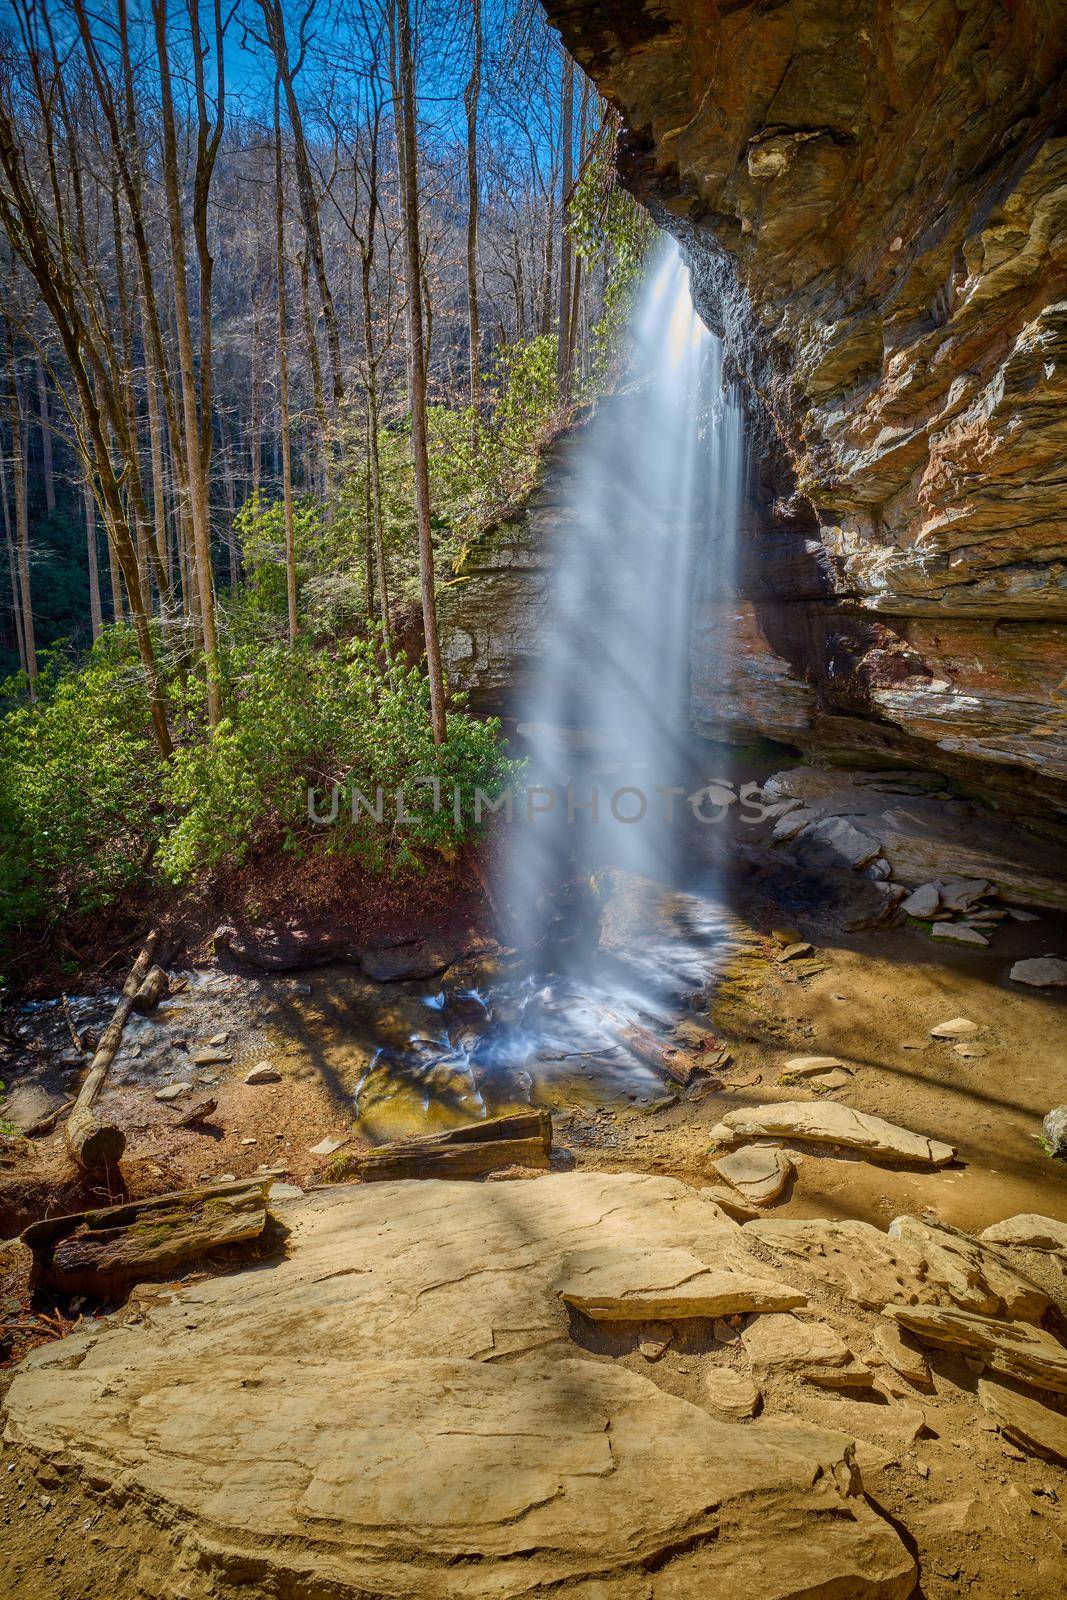 Side view of Moore Cove Waterfall in Pisgah National Forest near Brevard NC.